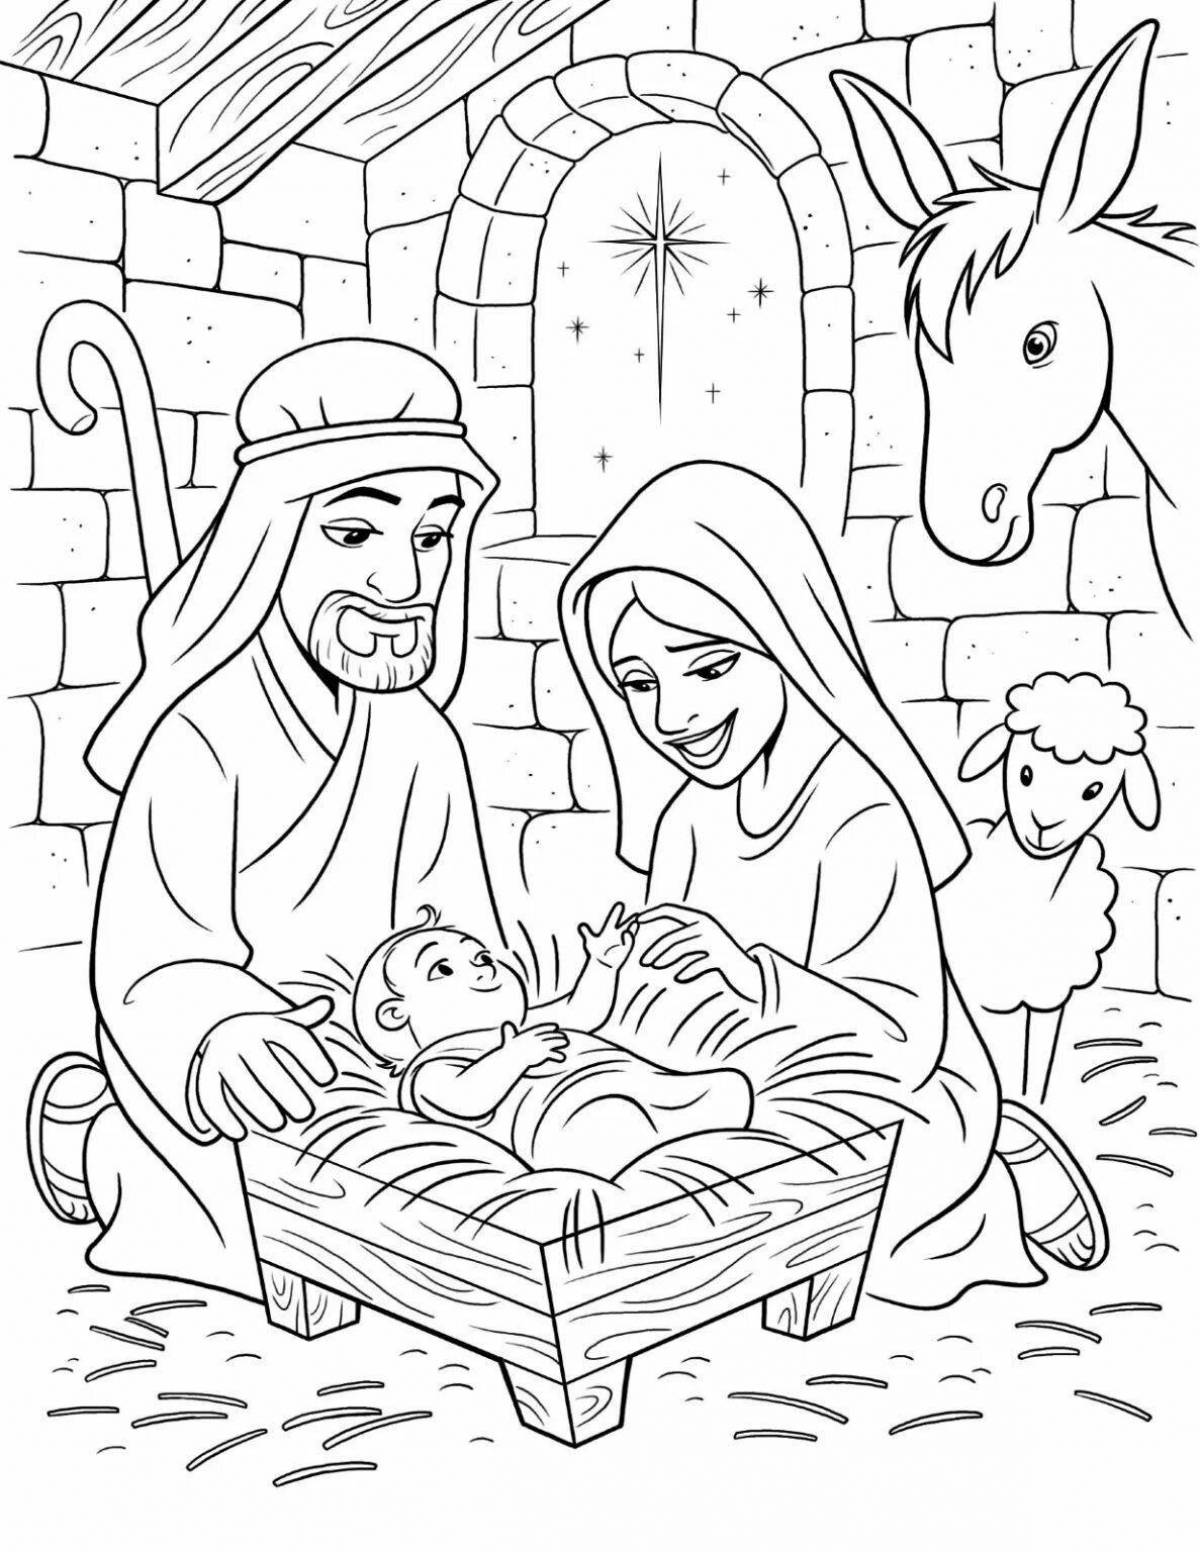 Playful Christmas coloring book for 3-4 year olds